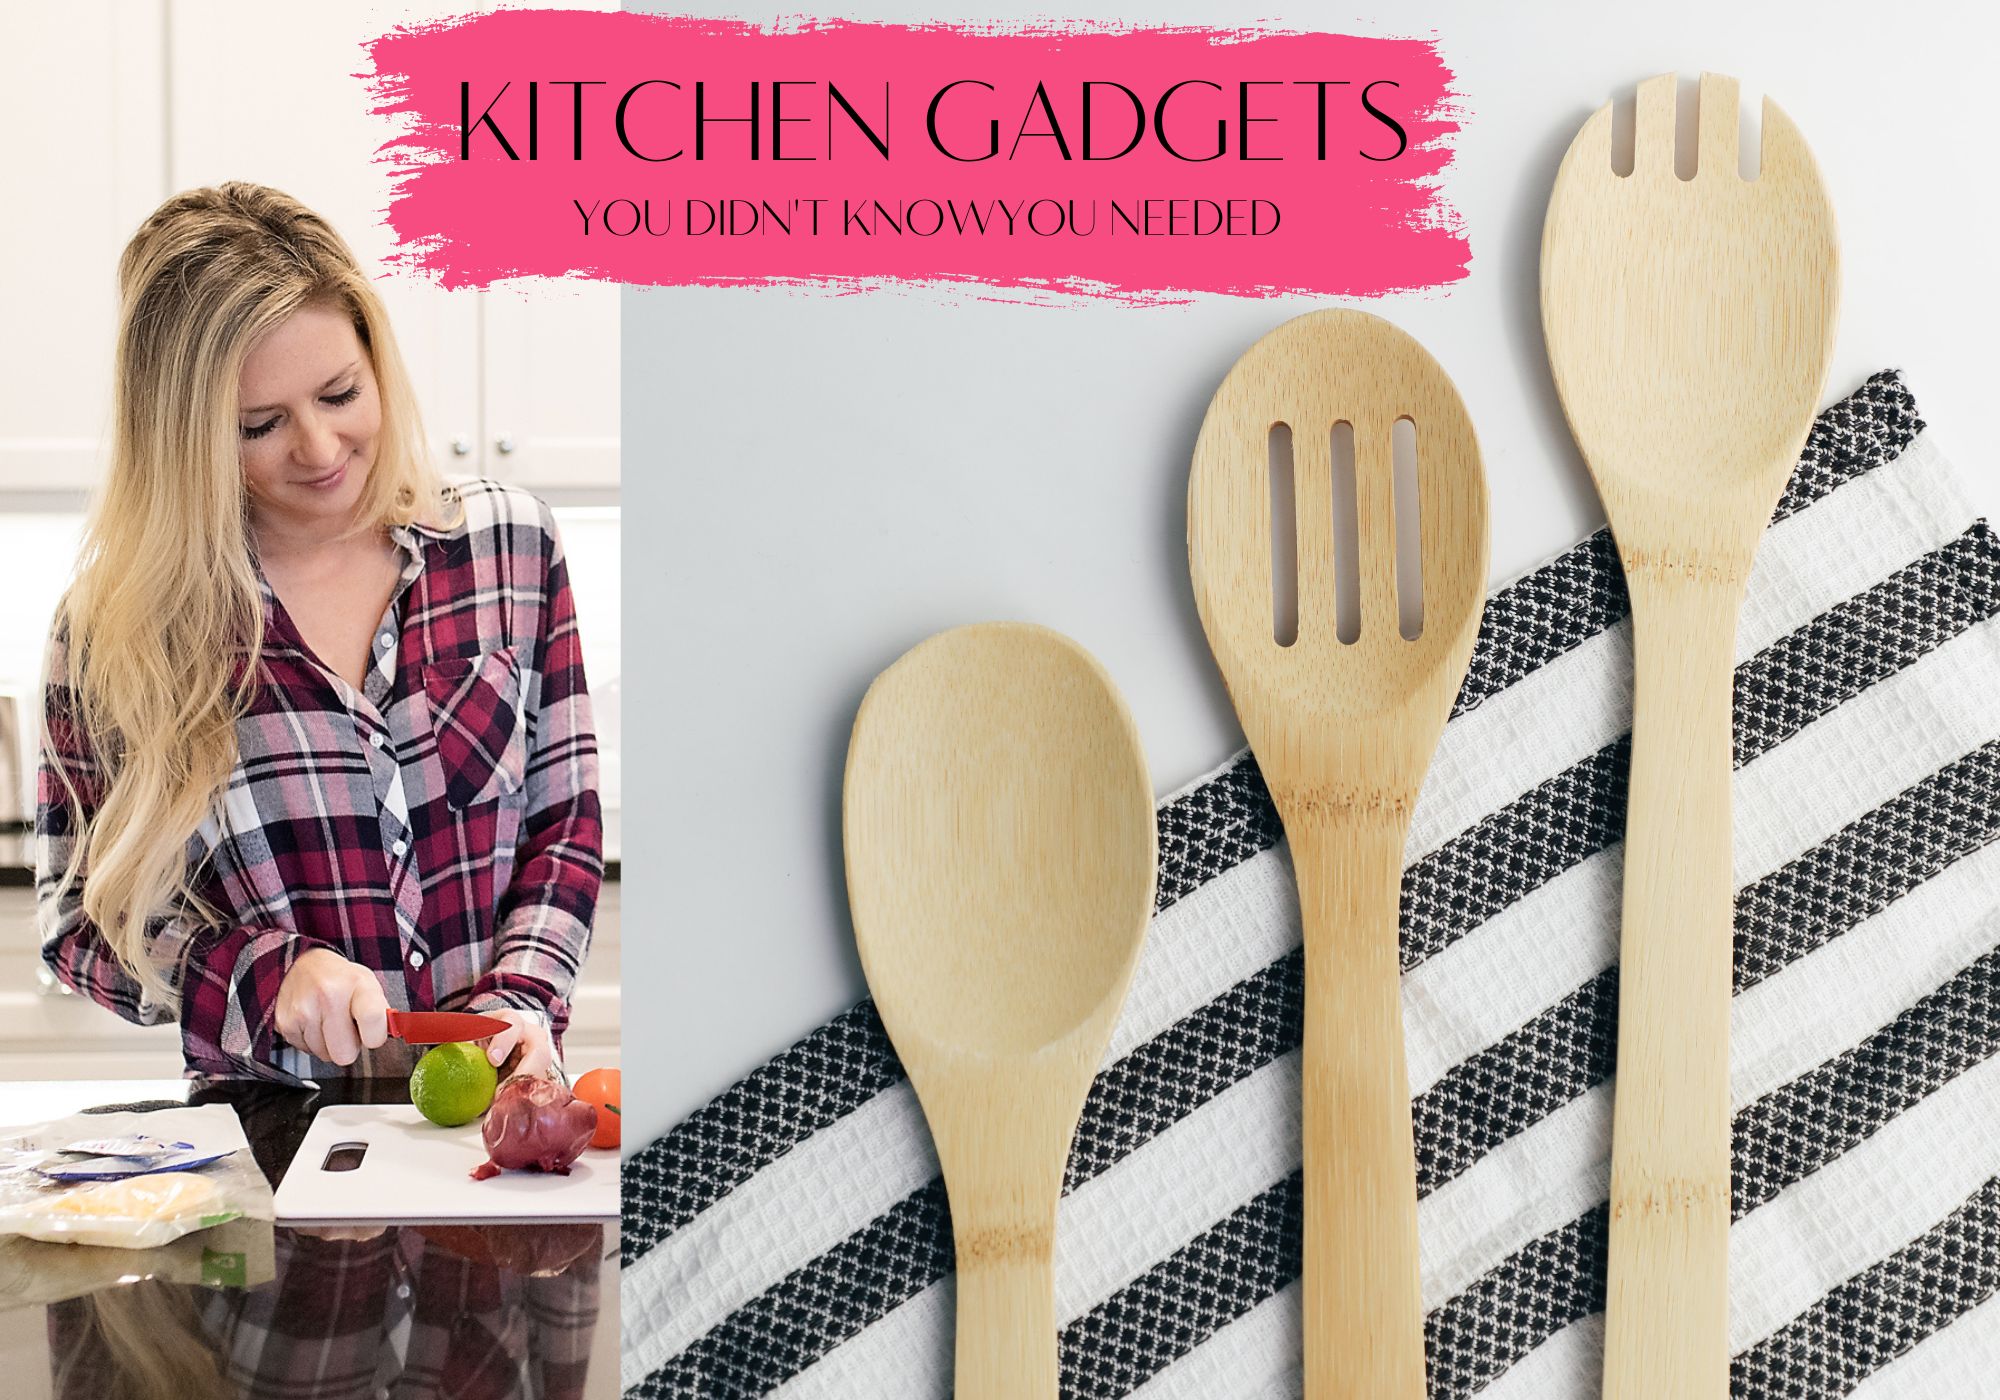 These are the kitchen items you didn't know you needed from  